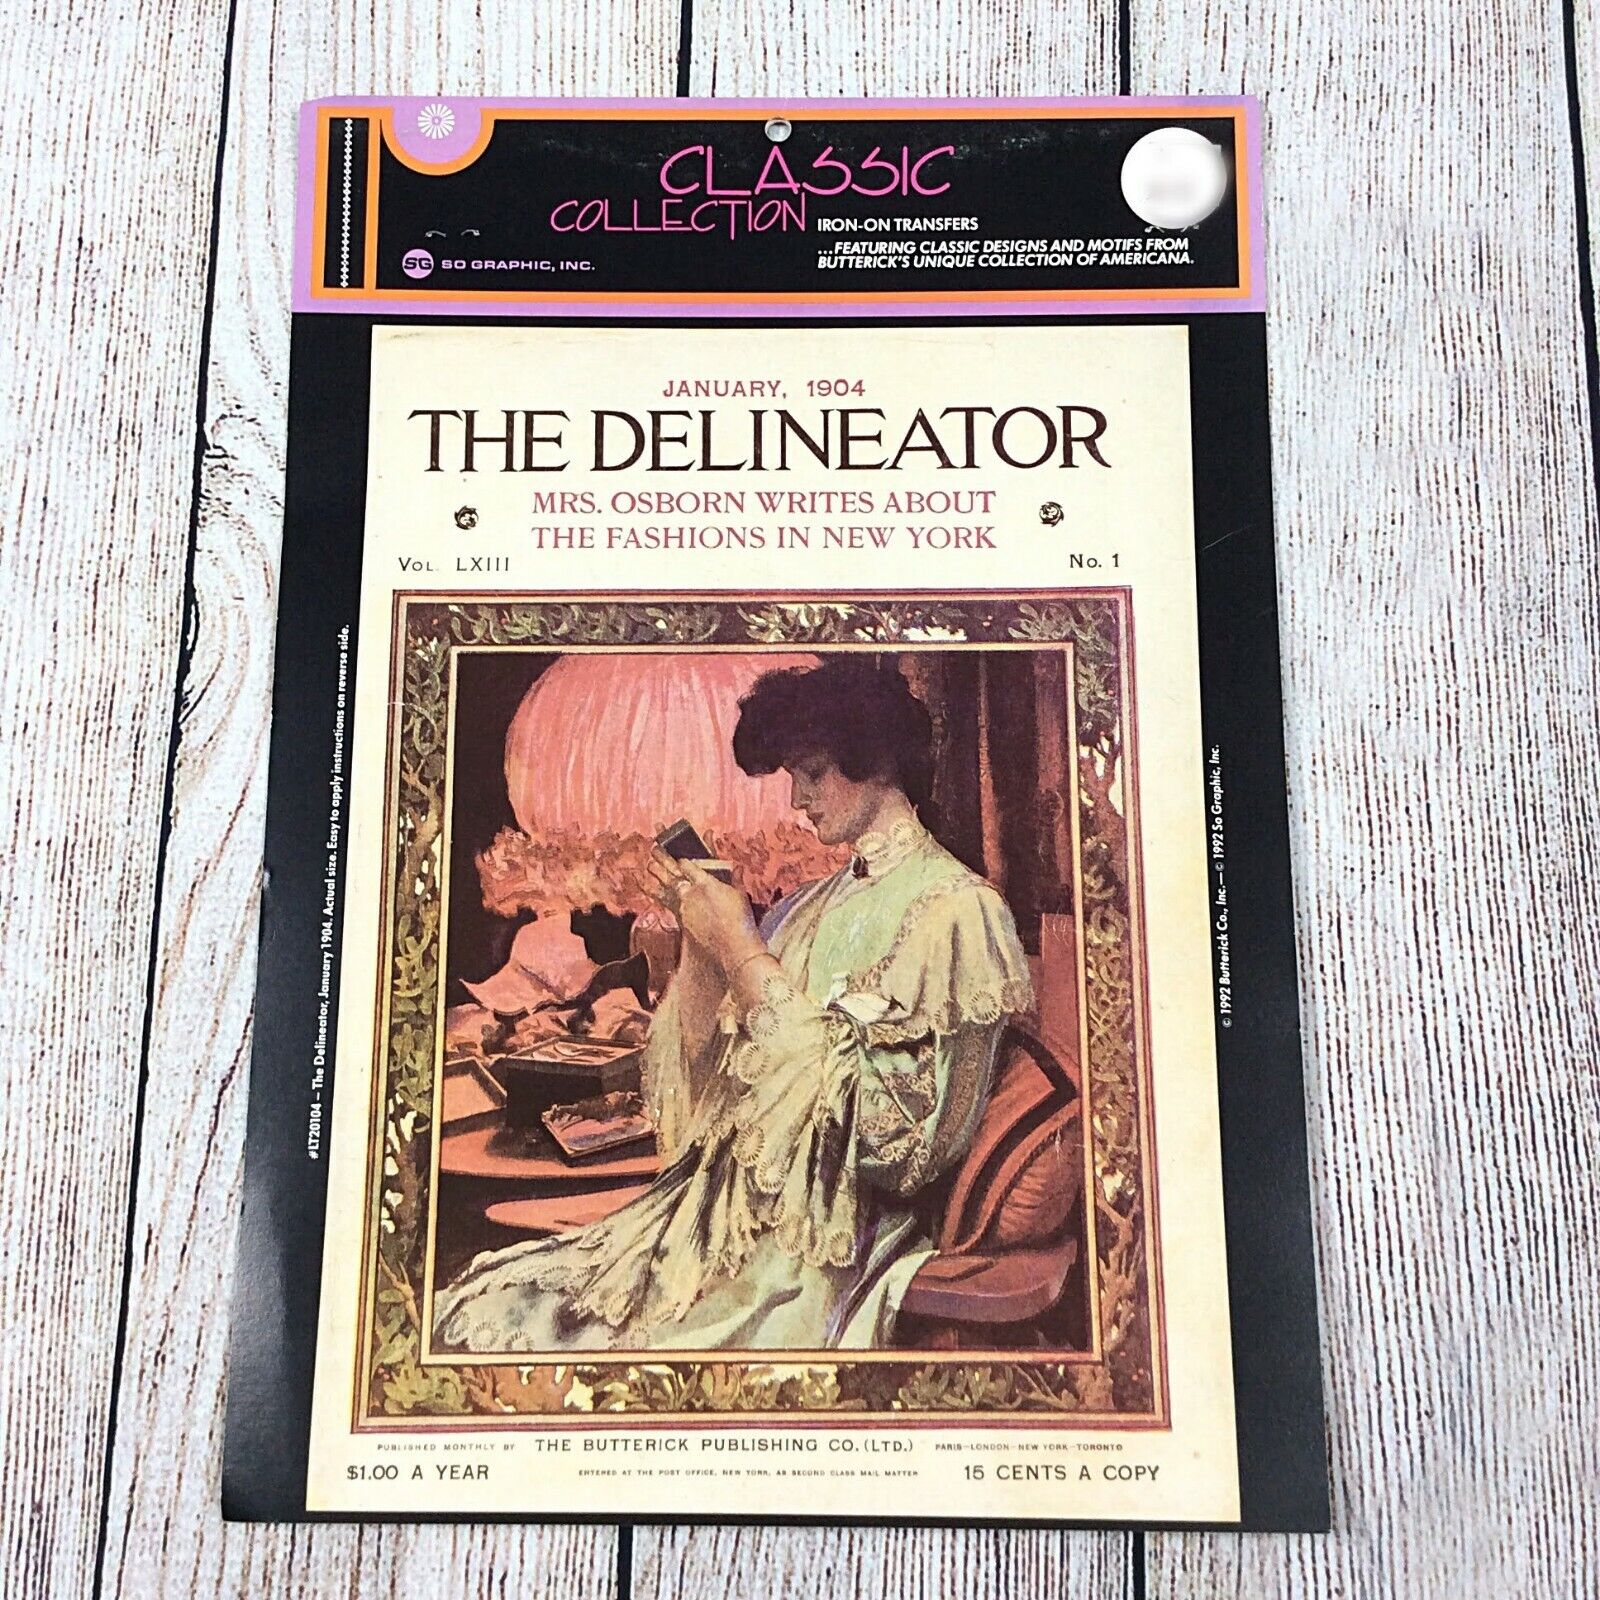 VTG Butterick Iron On Transfer Americana Delineator Jan 1904 Classic Collection 